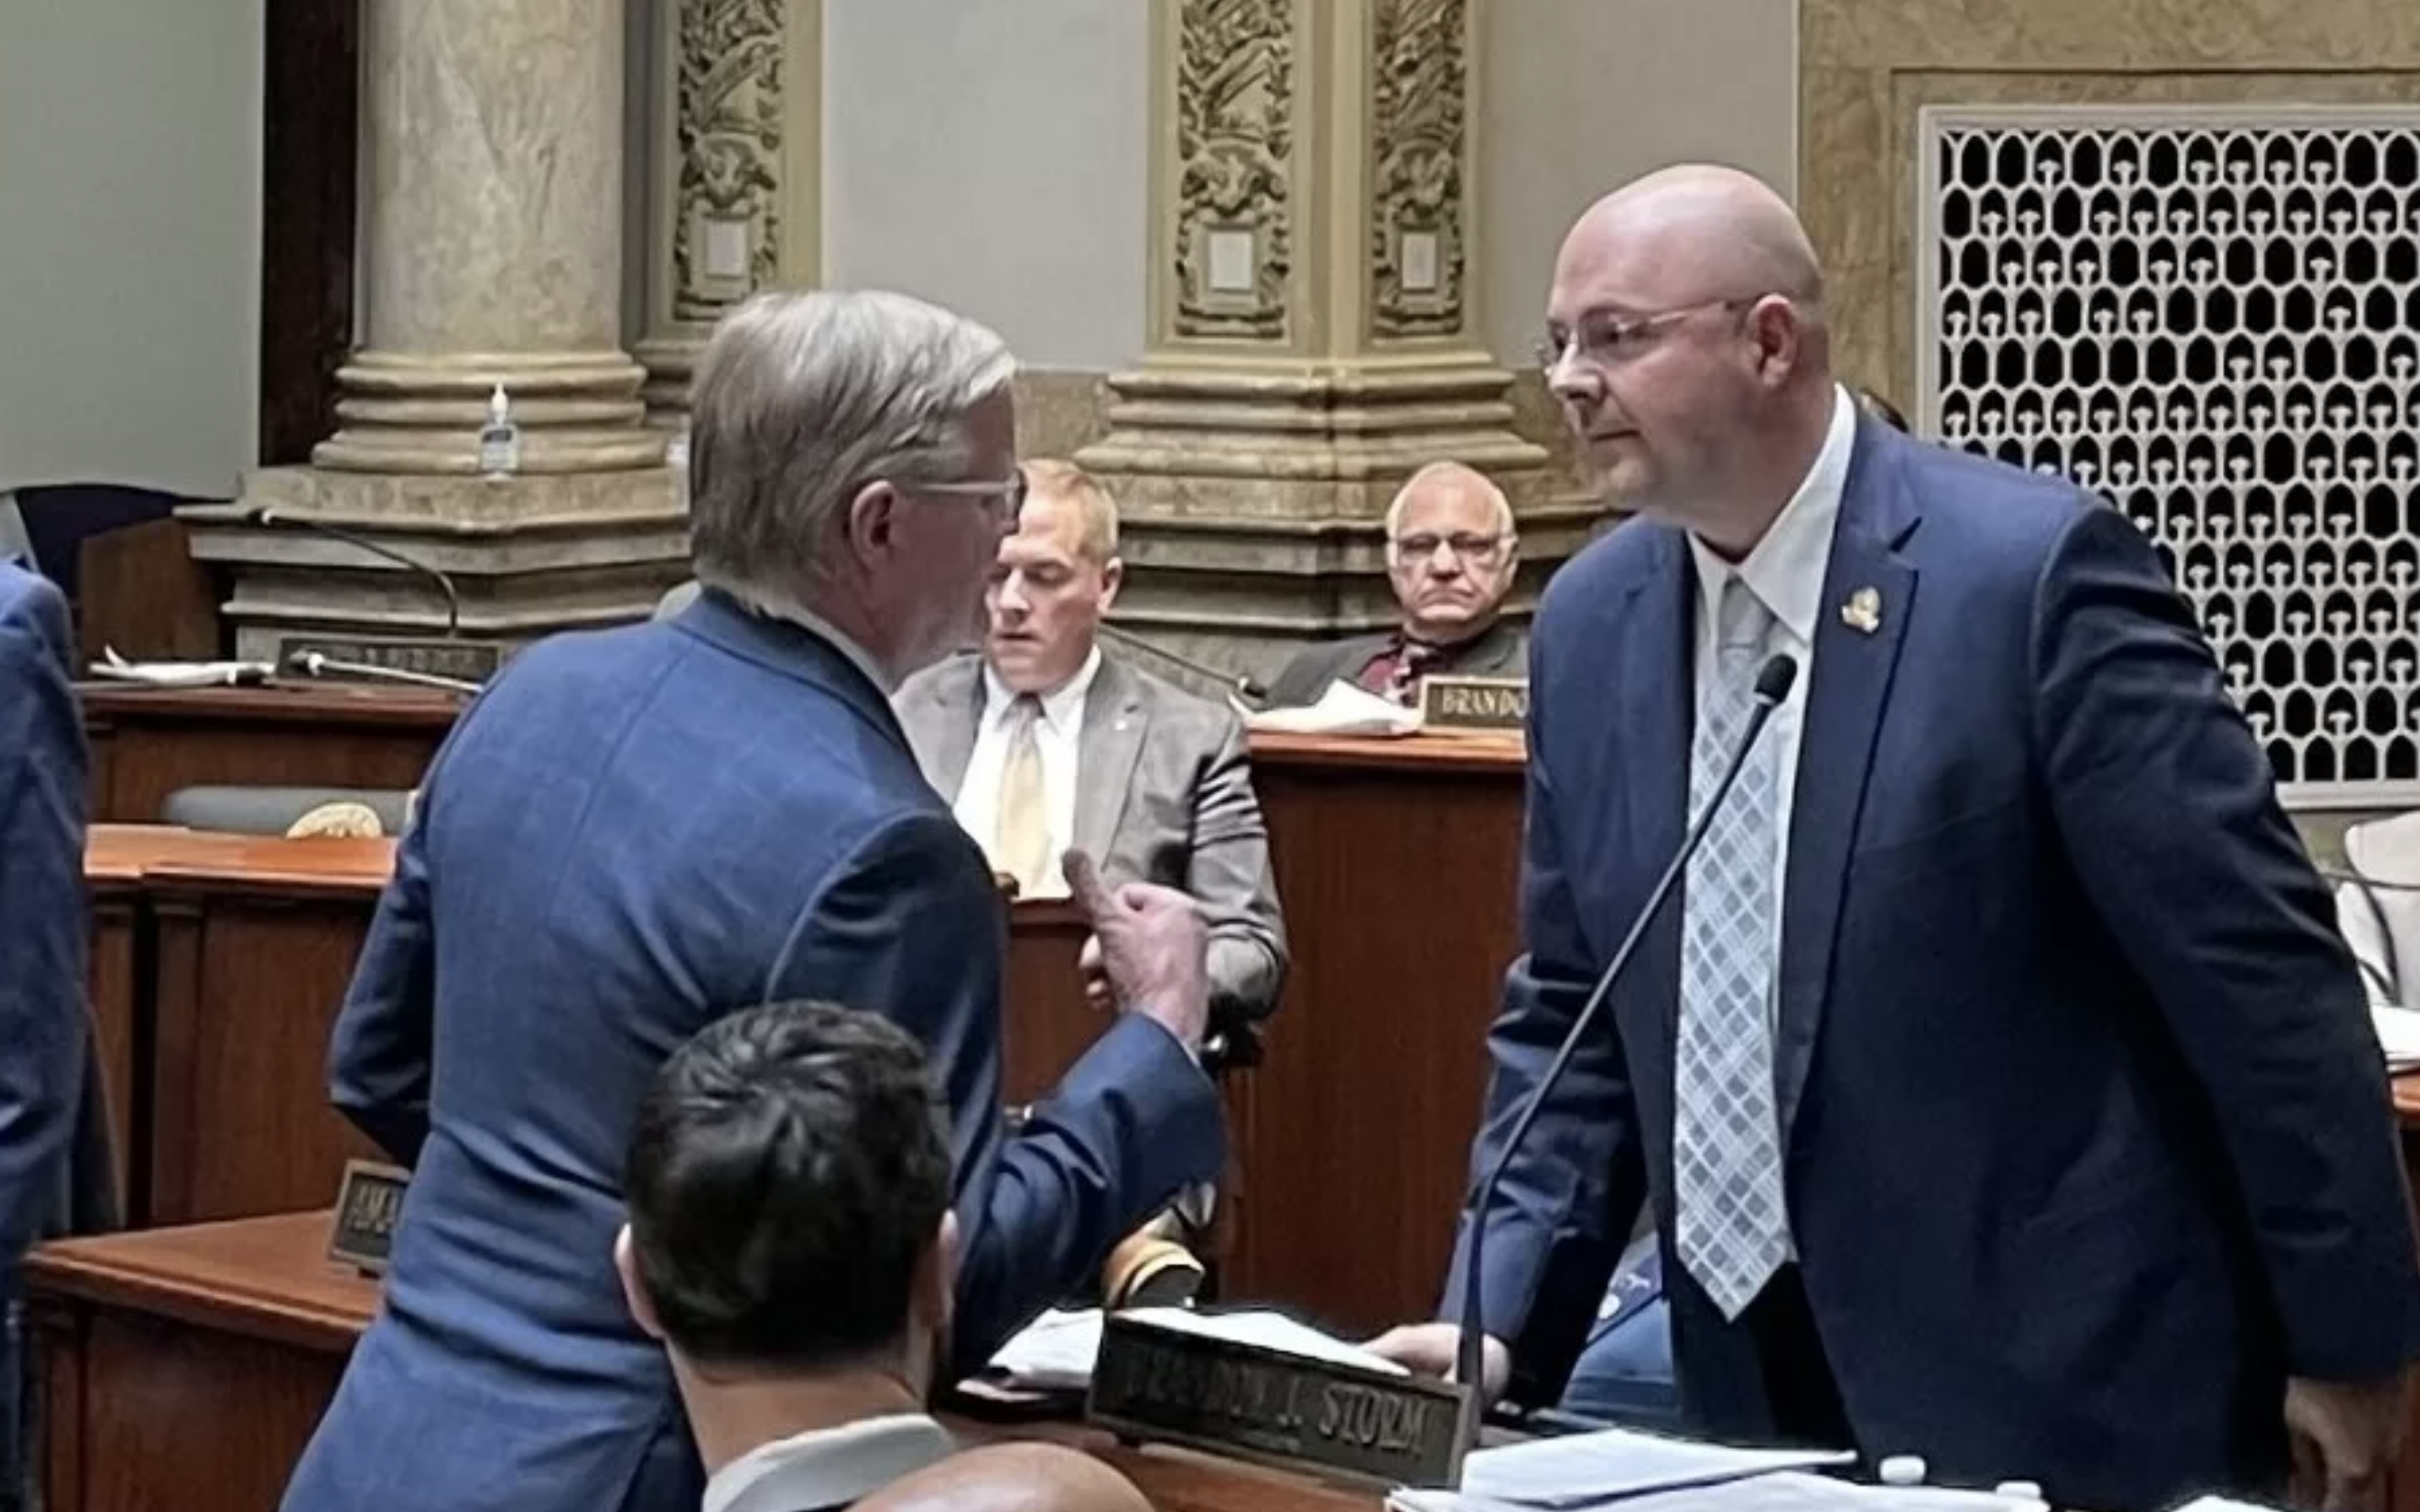 Leaders from two different political parties agree on pace in the Kentucky Senate